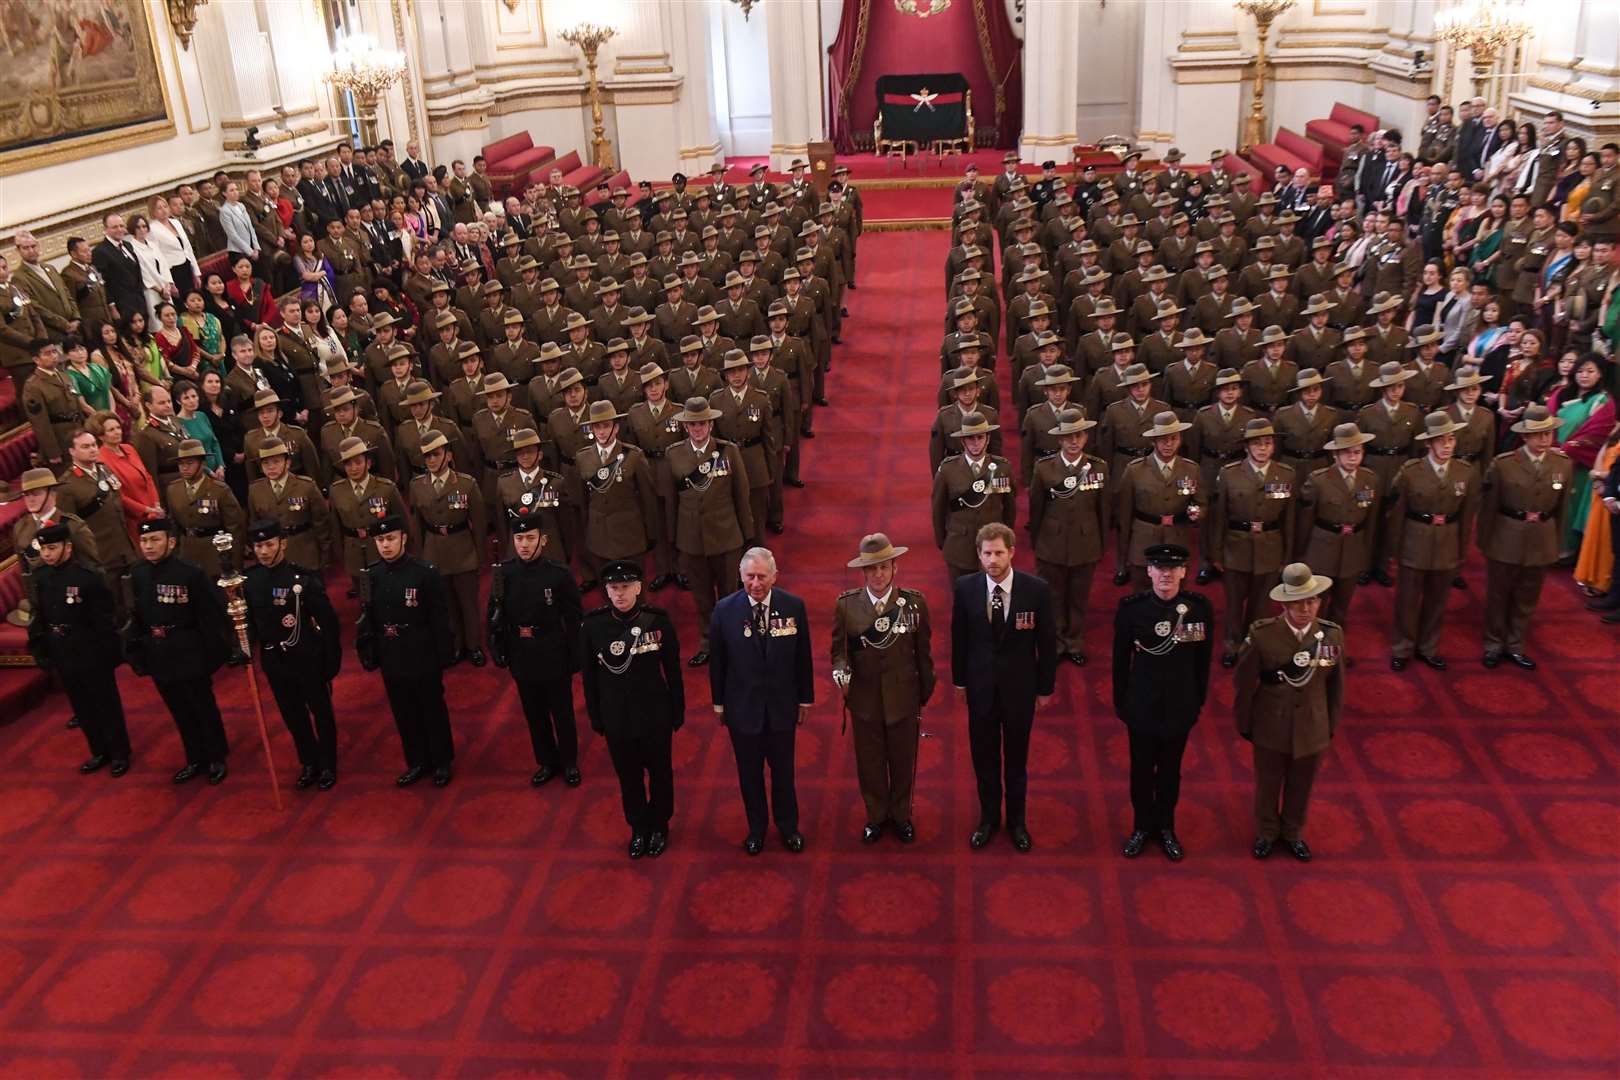 The ceremony has taken place at Buckingham Palace today. Picture: Crown copyright/Cpl Steve Duncombe